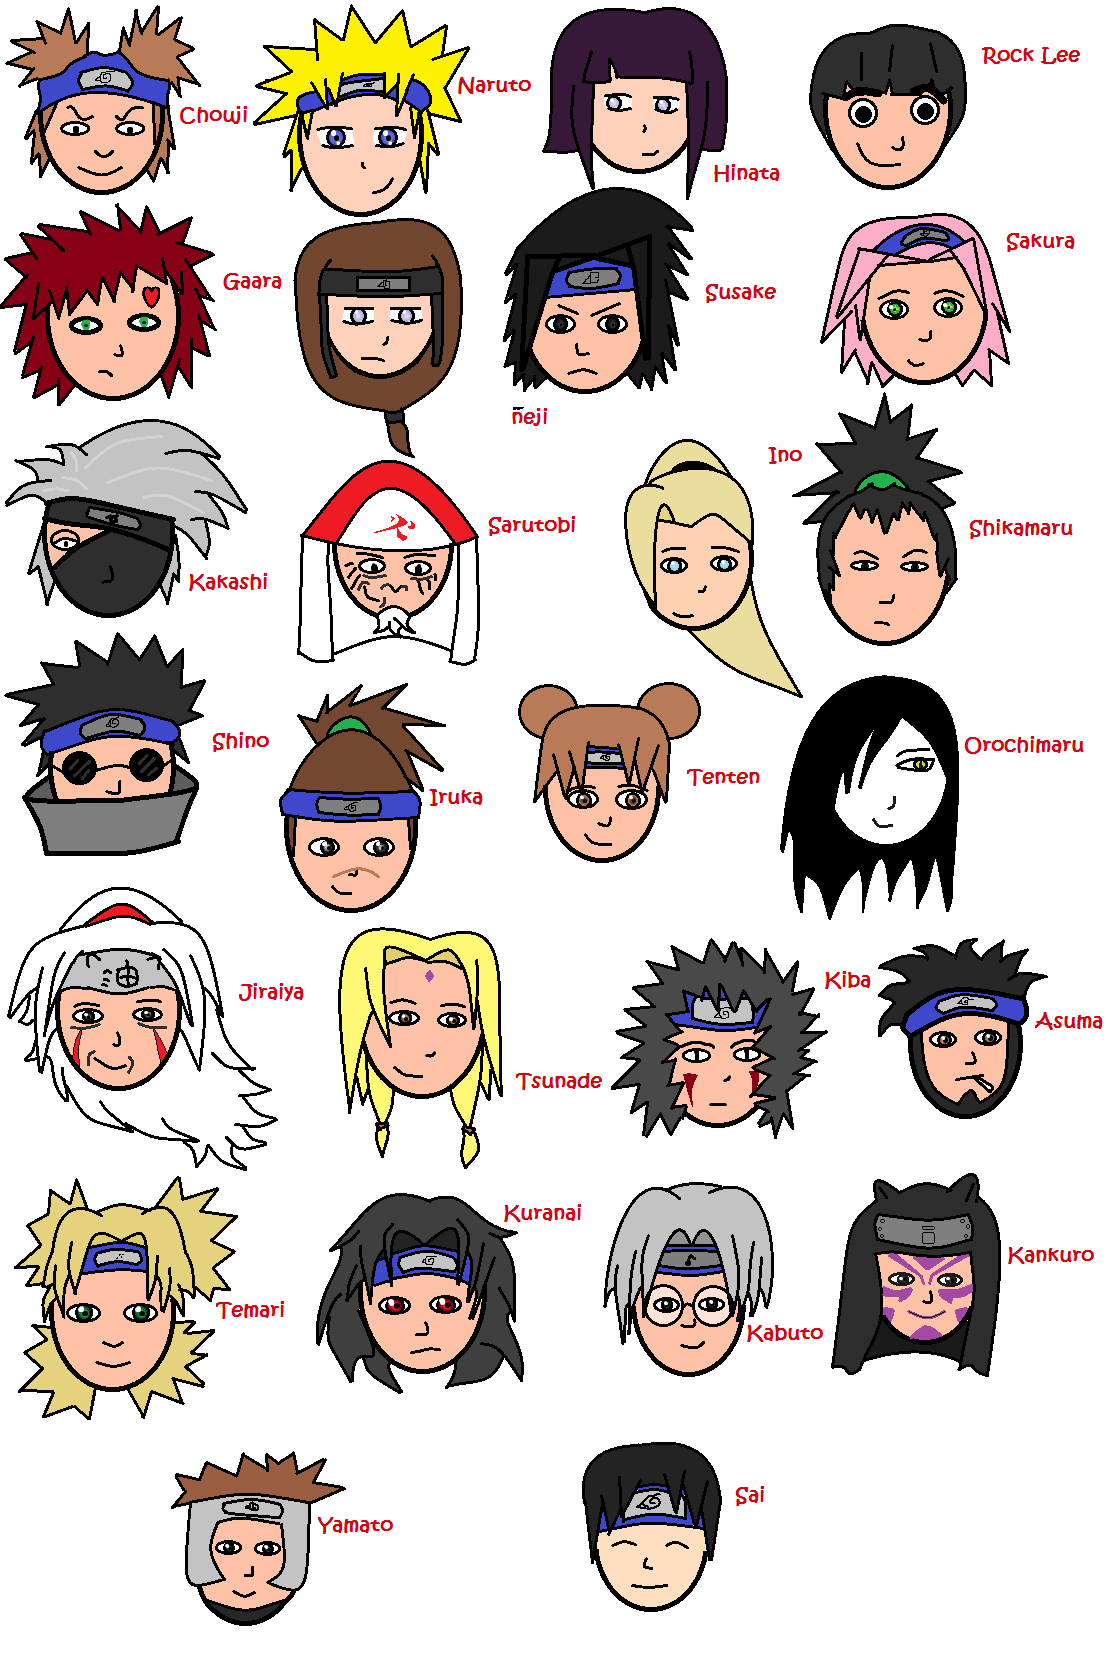 Naruto Shippuden Characters 1 by Valliegurl on DeviantArt